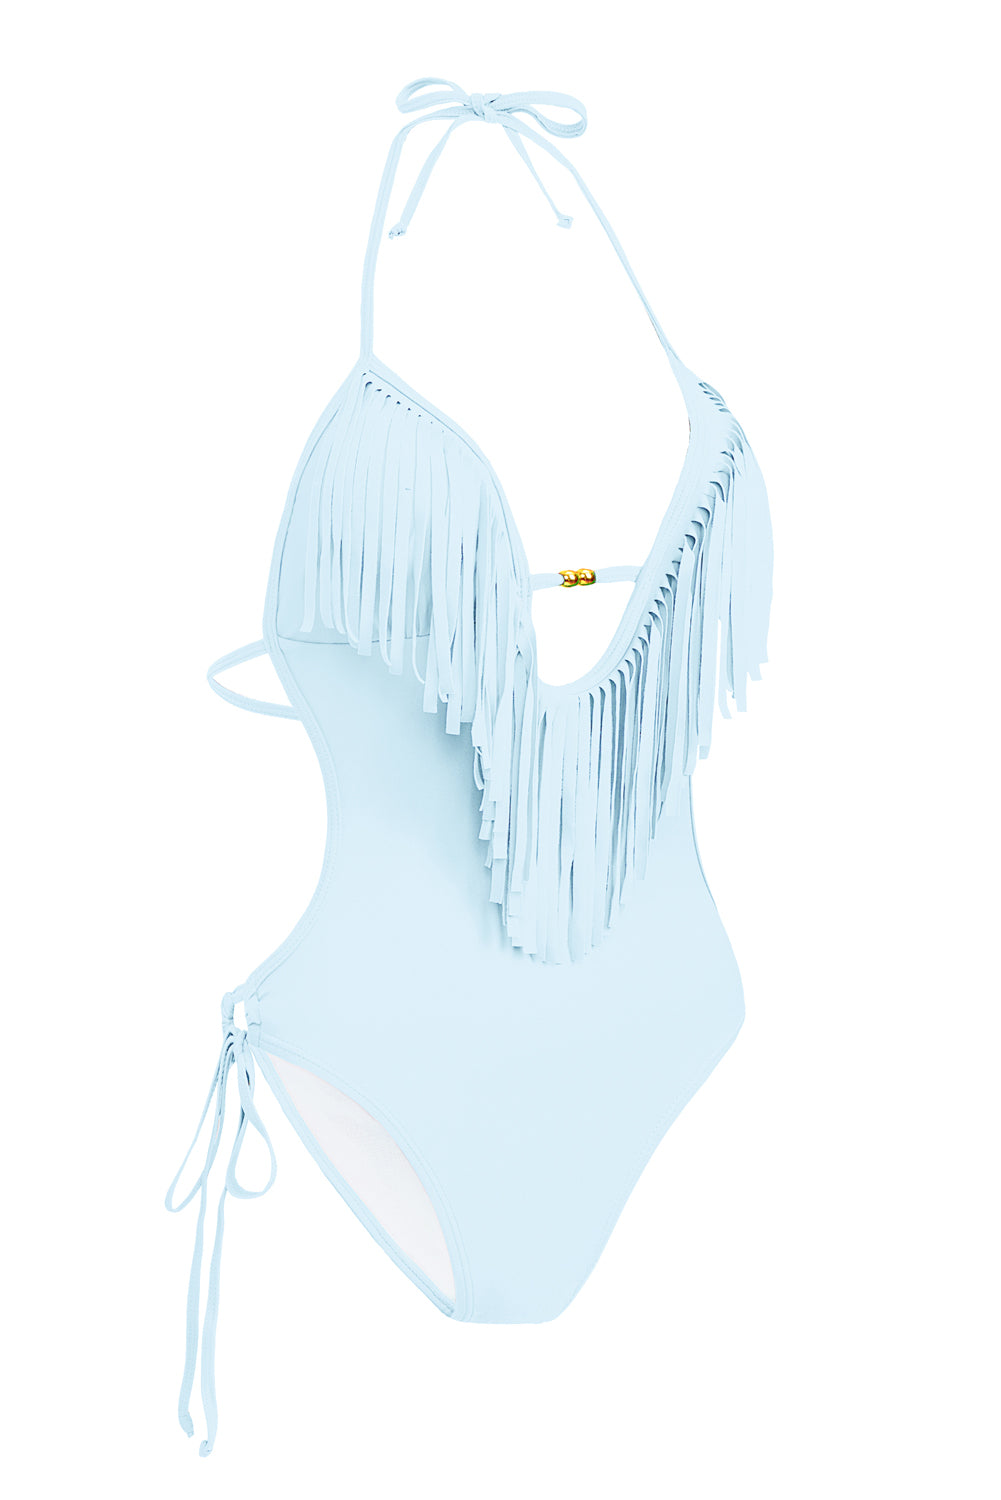 LC443432-4-S, LC443432-4-M, LC443432-4-L, LC443432-4-XL, LC443432-4-2XL, Sky Blue Tassel One Piece Swimsuits for Women Halter Backless Sexy Swimwear